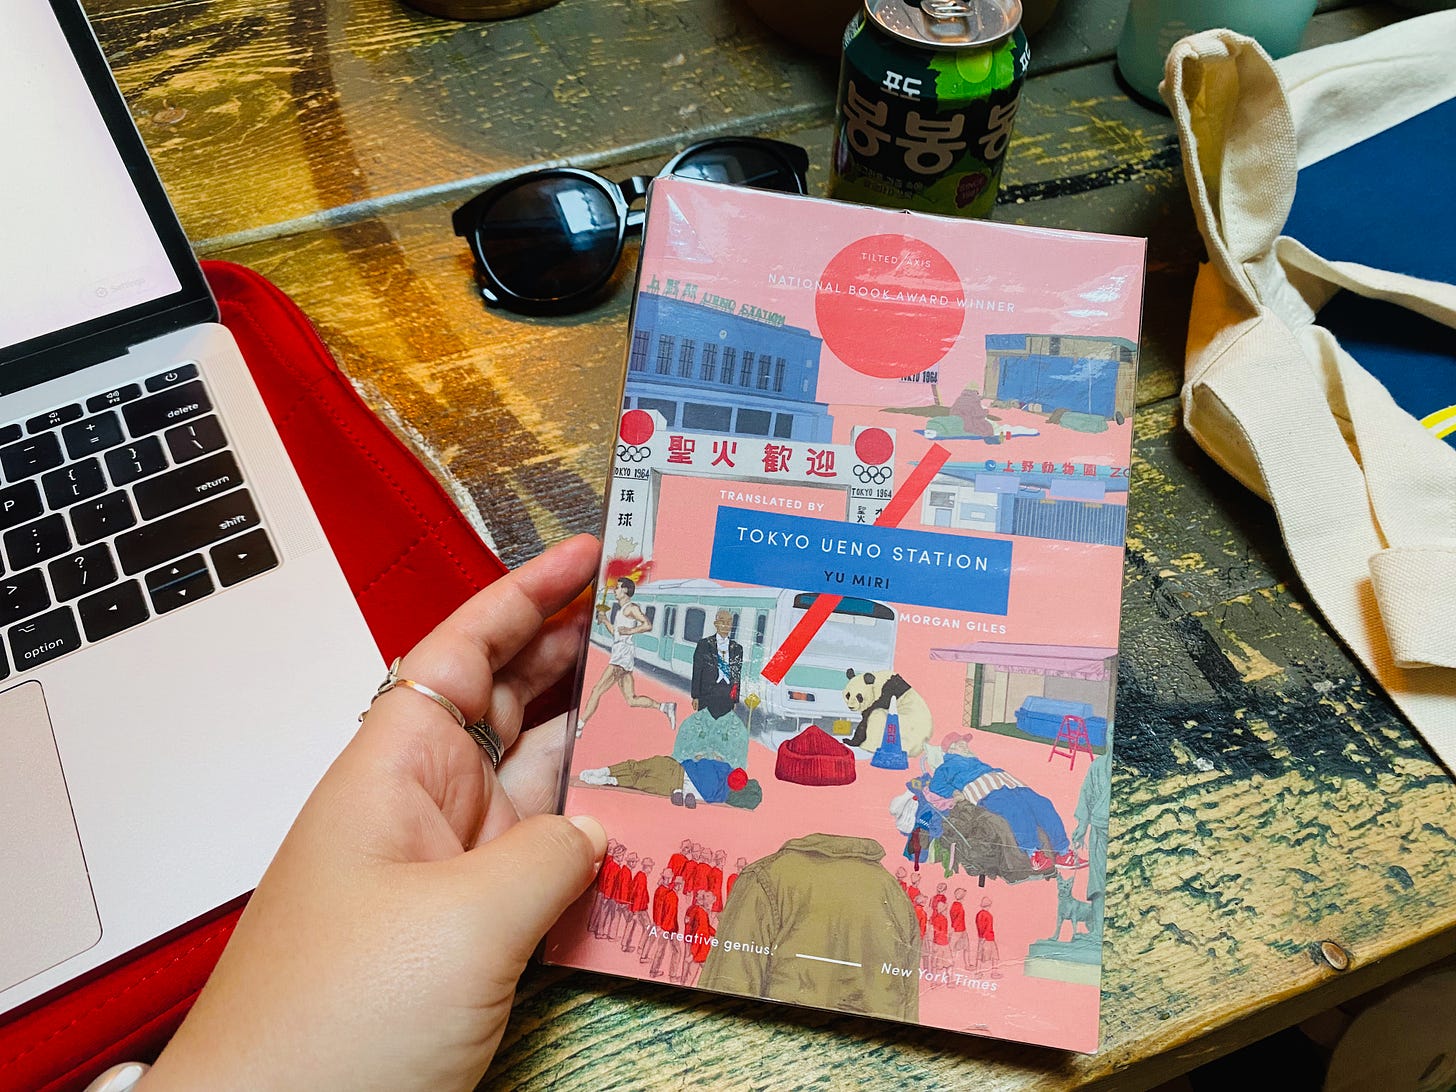 The paperback of 'Tokyo Ueno Station' held up on a wooden table, a laptop to its left and a pair of sunglasses and a Korean drink just above it. Part of a tote bag is seen on the right.